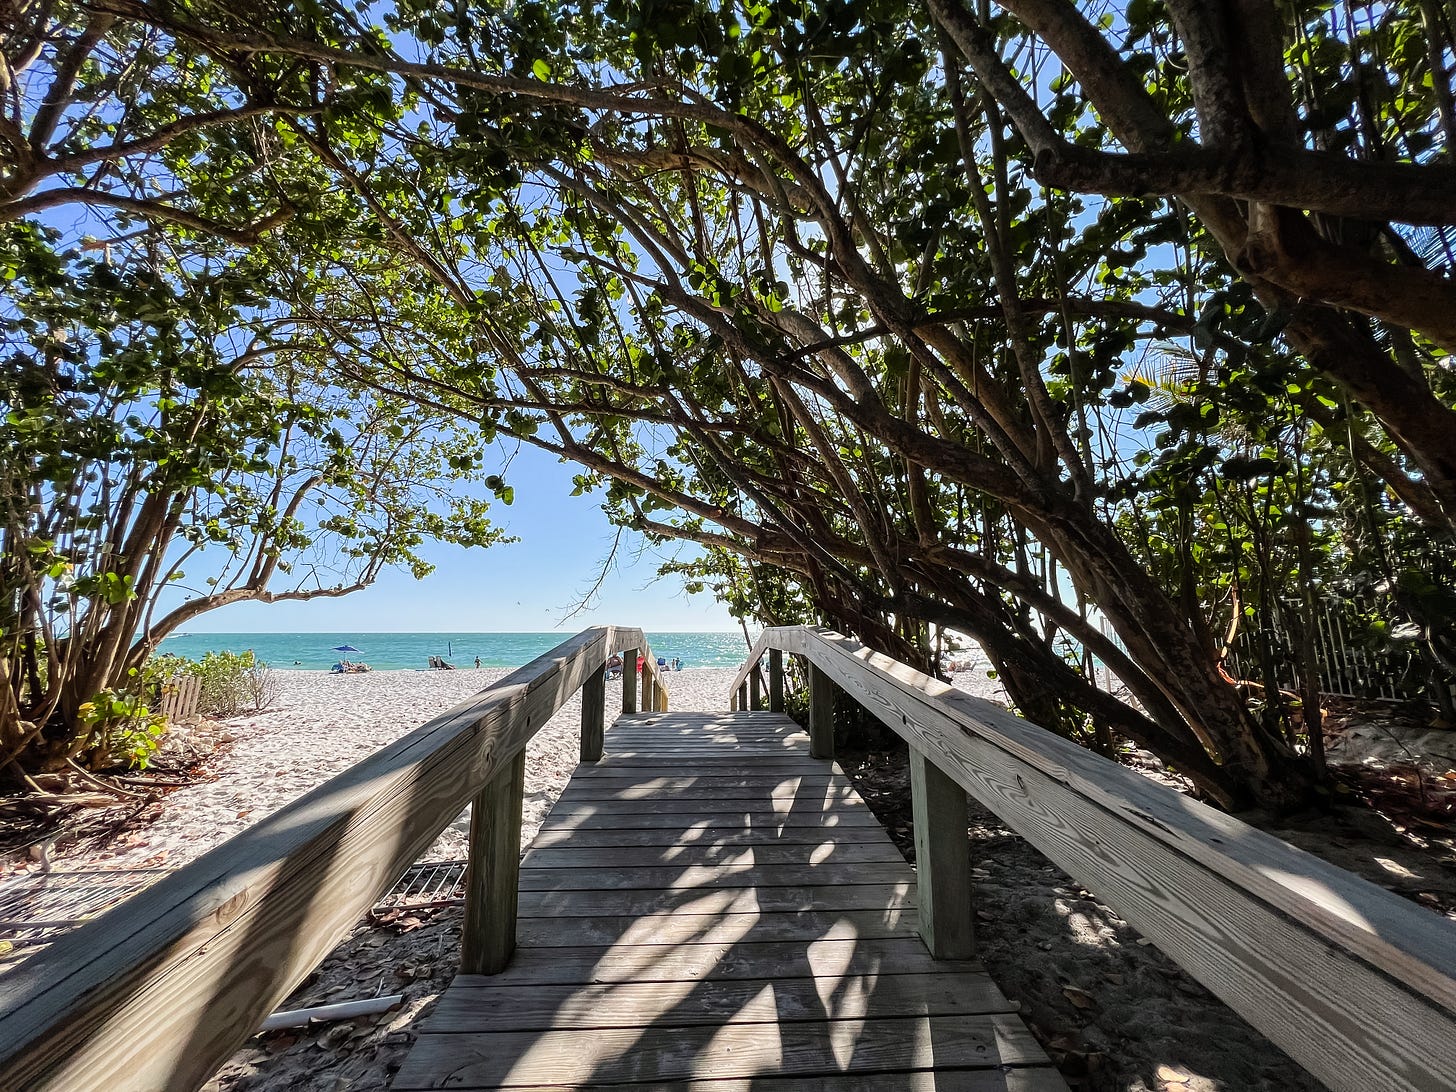 Photo of a wooden boardwalk shrouded in a canopy of trees with sunlight streaming through as the path leads to a sandy beach on a clear blue sky day.